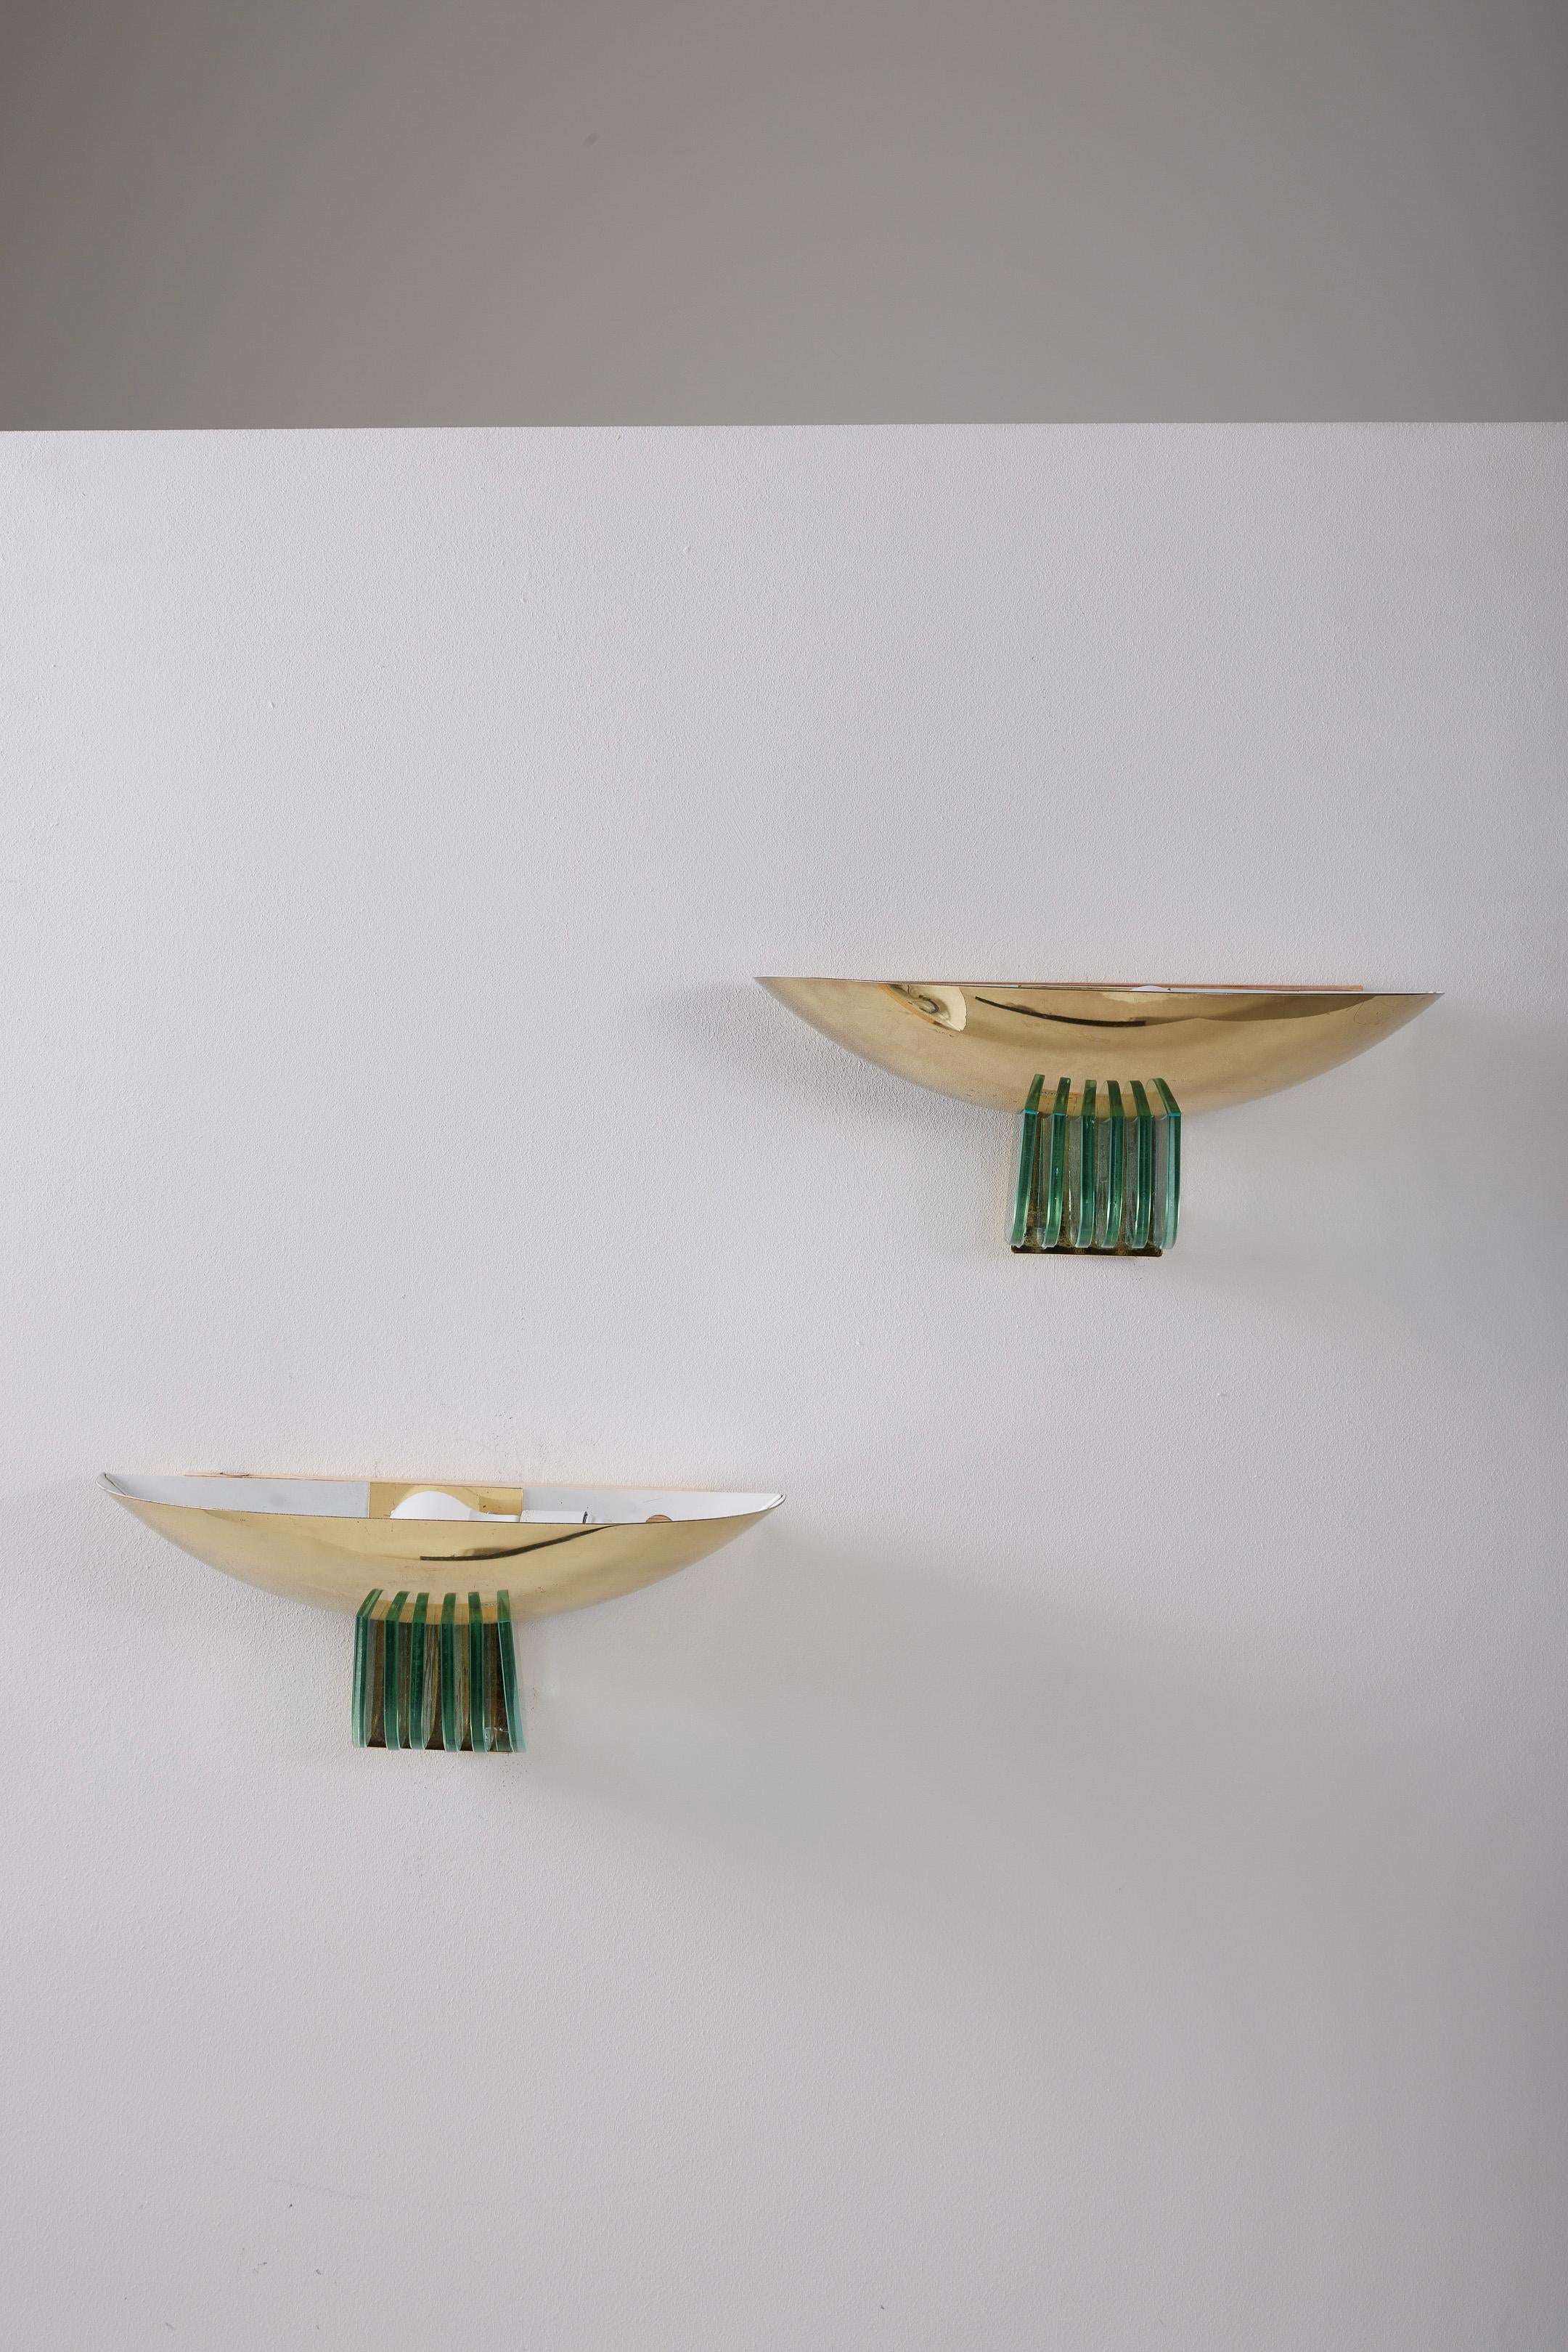  Pair of wall sconces in gilded brass and glass, glass inserts. Very good condition.
LP2146